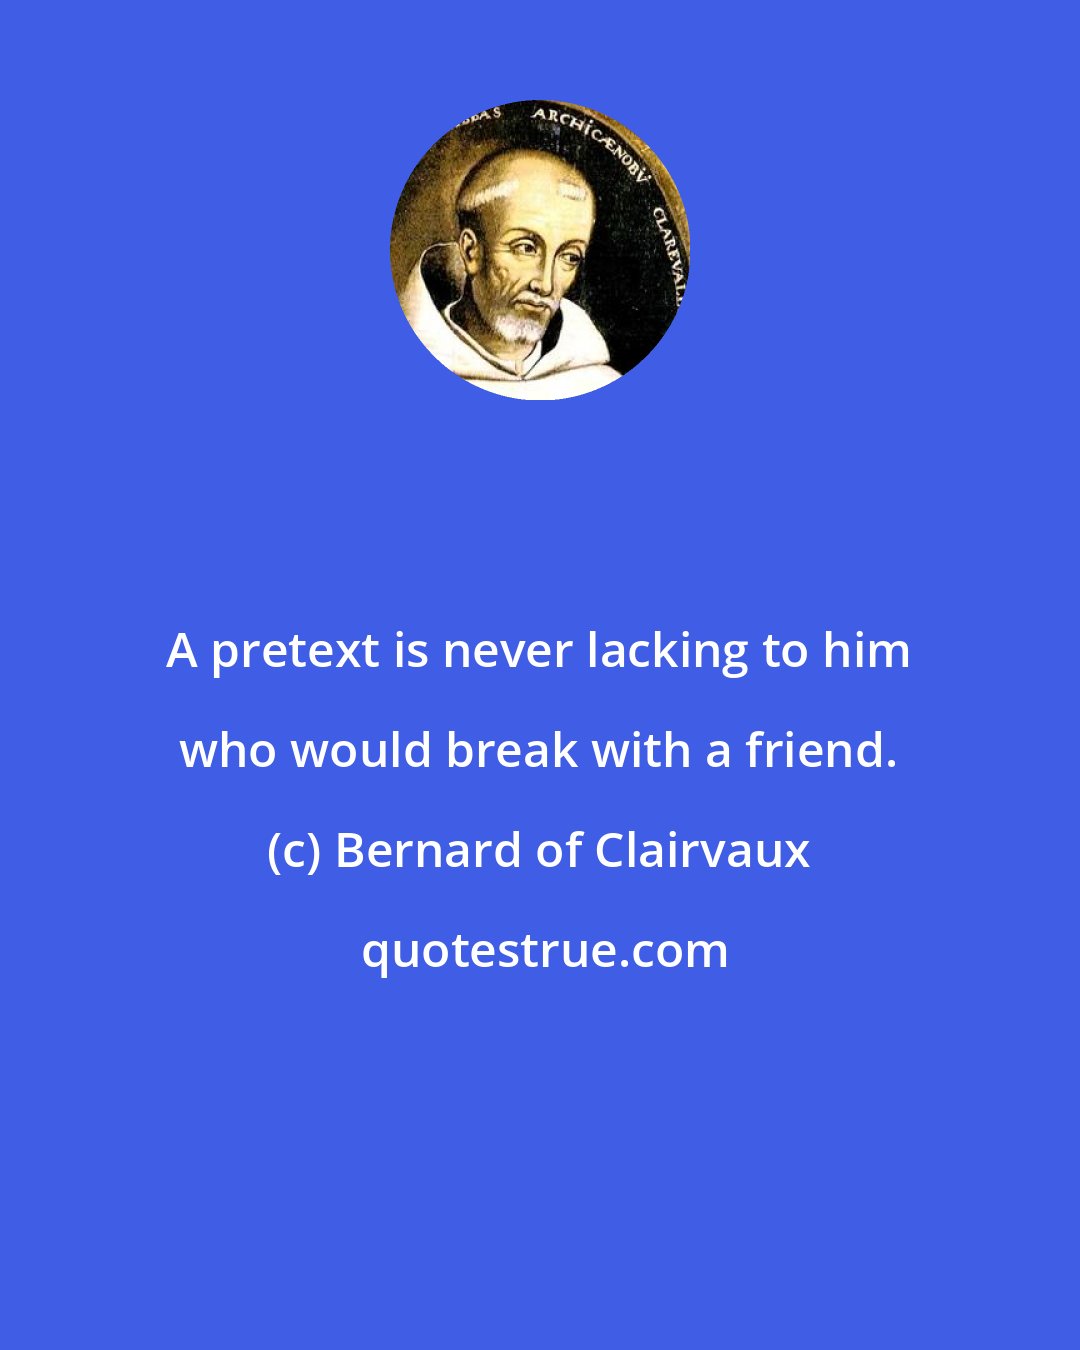 Bernard of Clairvaux: A pretext is never lacking to him who would break with a friend.